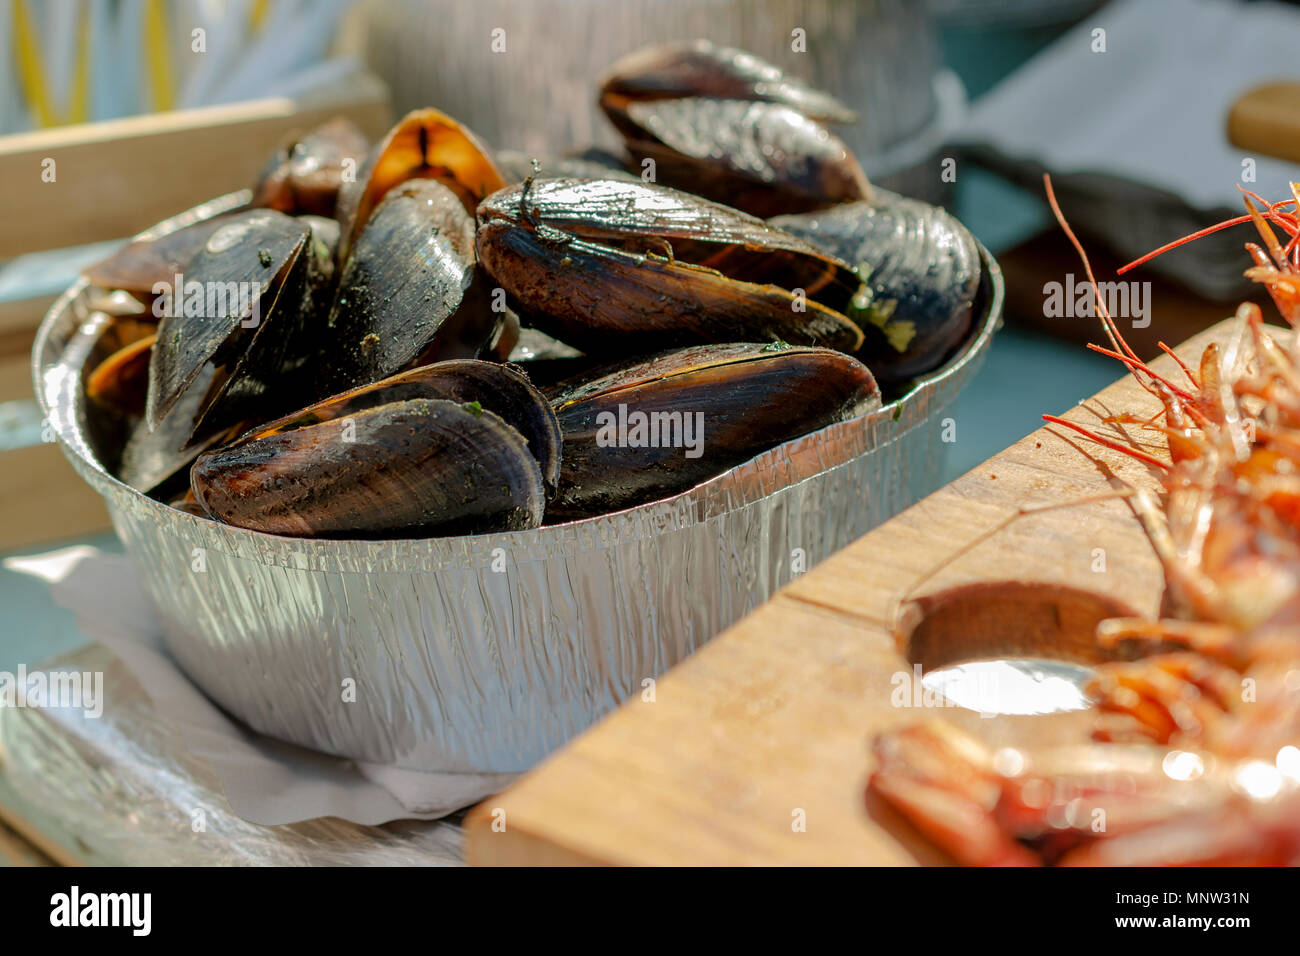 https://c8.alamy.com/comp/MNW31N/fresh-boiled-mussels-in-iron-pan-delicious-seafood-shellfish-food-selective-focus-close-up-MNW31N.jpg